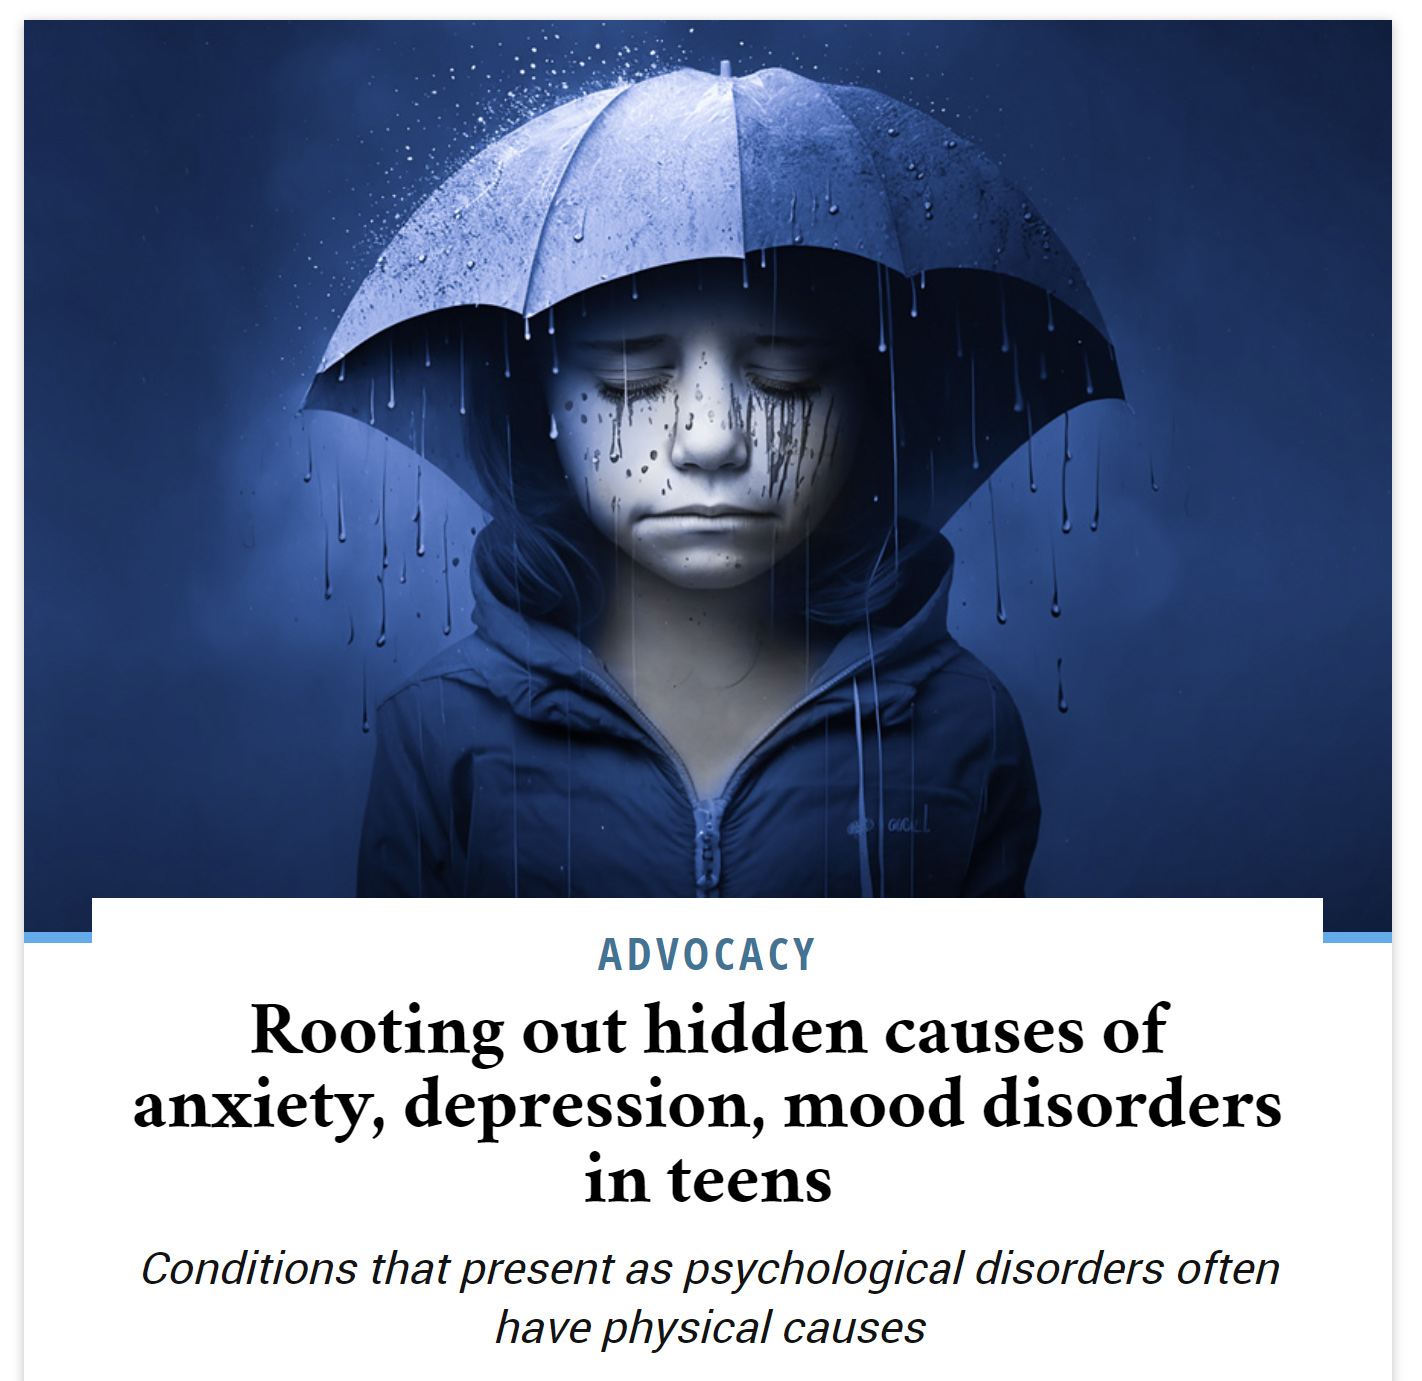 Rooting out hidden causes of anxiety, depression, mood disorders in teens